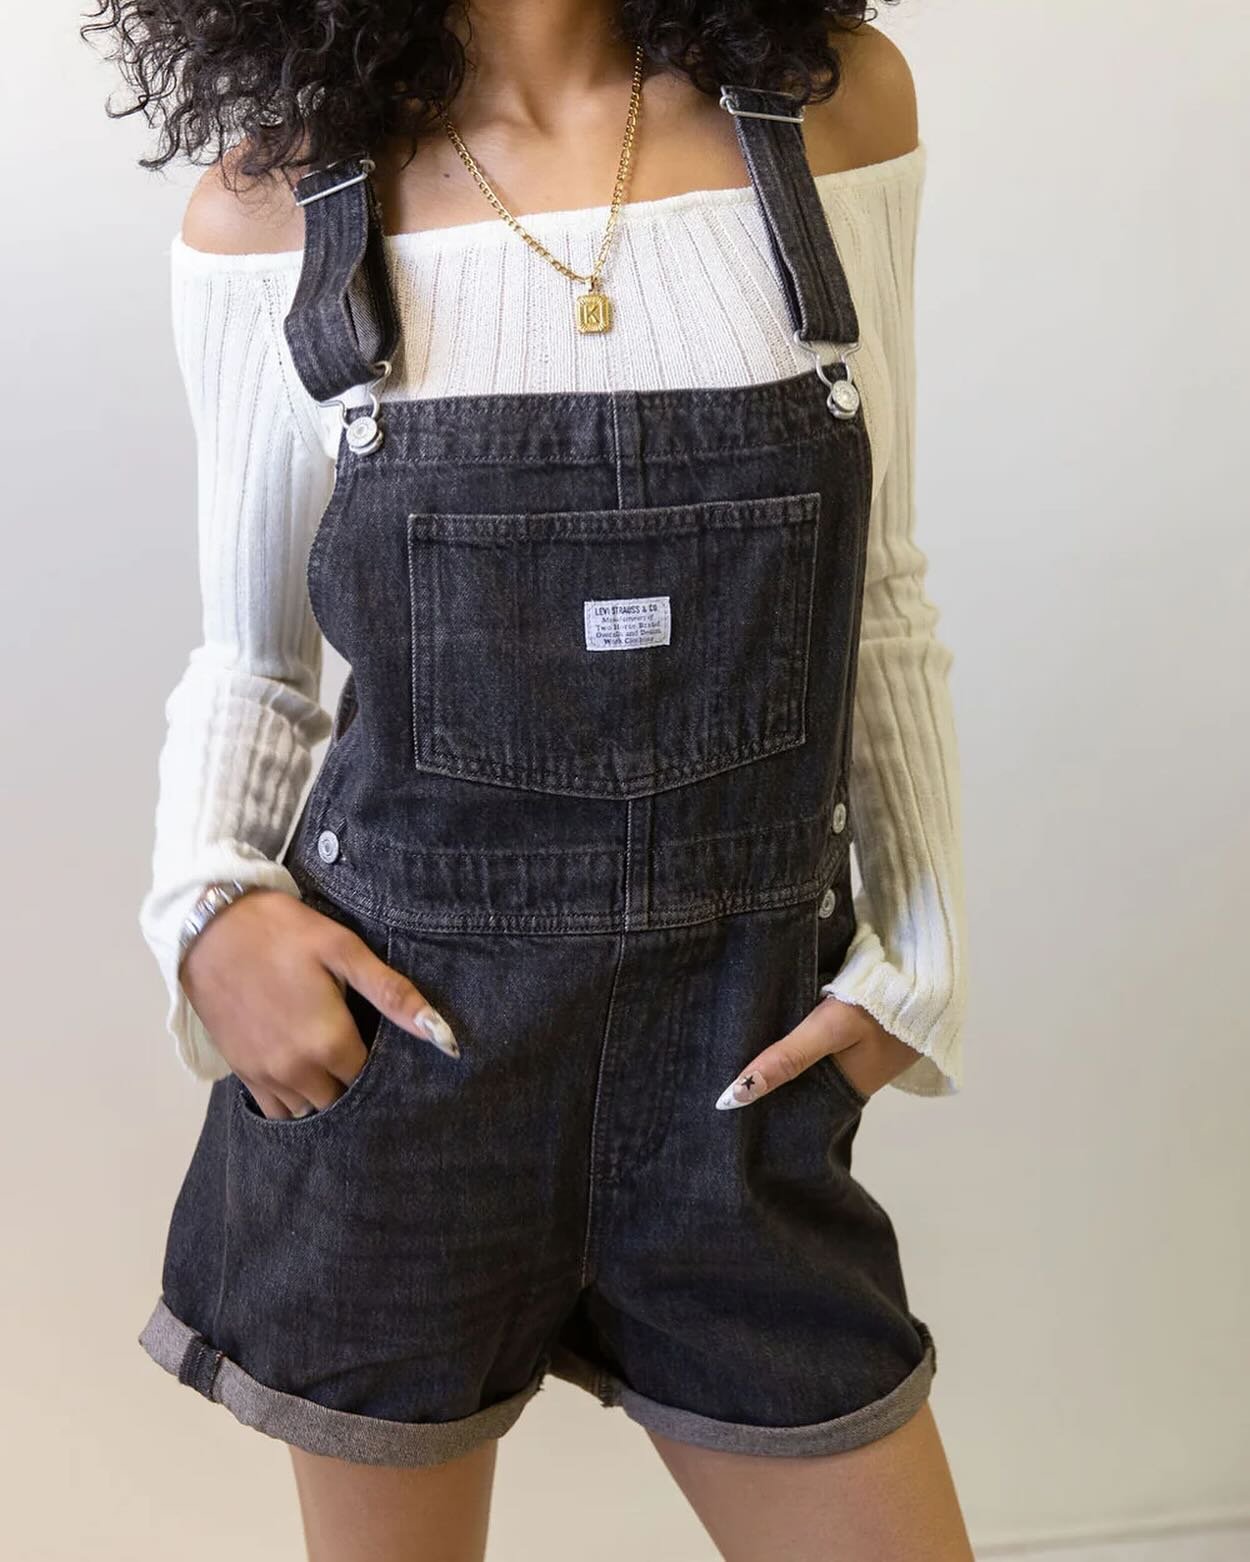 Levi&rsquo;s Shortalls are back in 3 washes 🌞